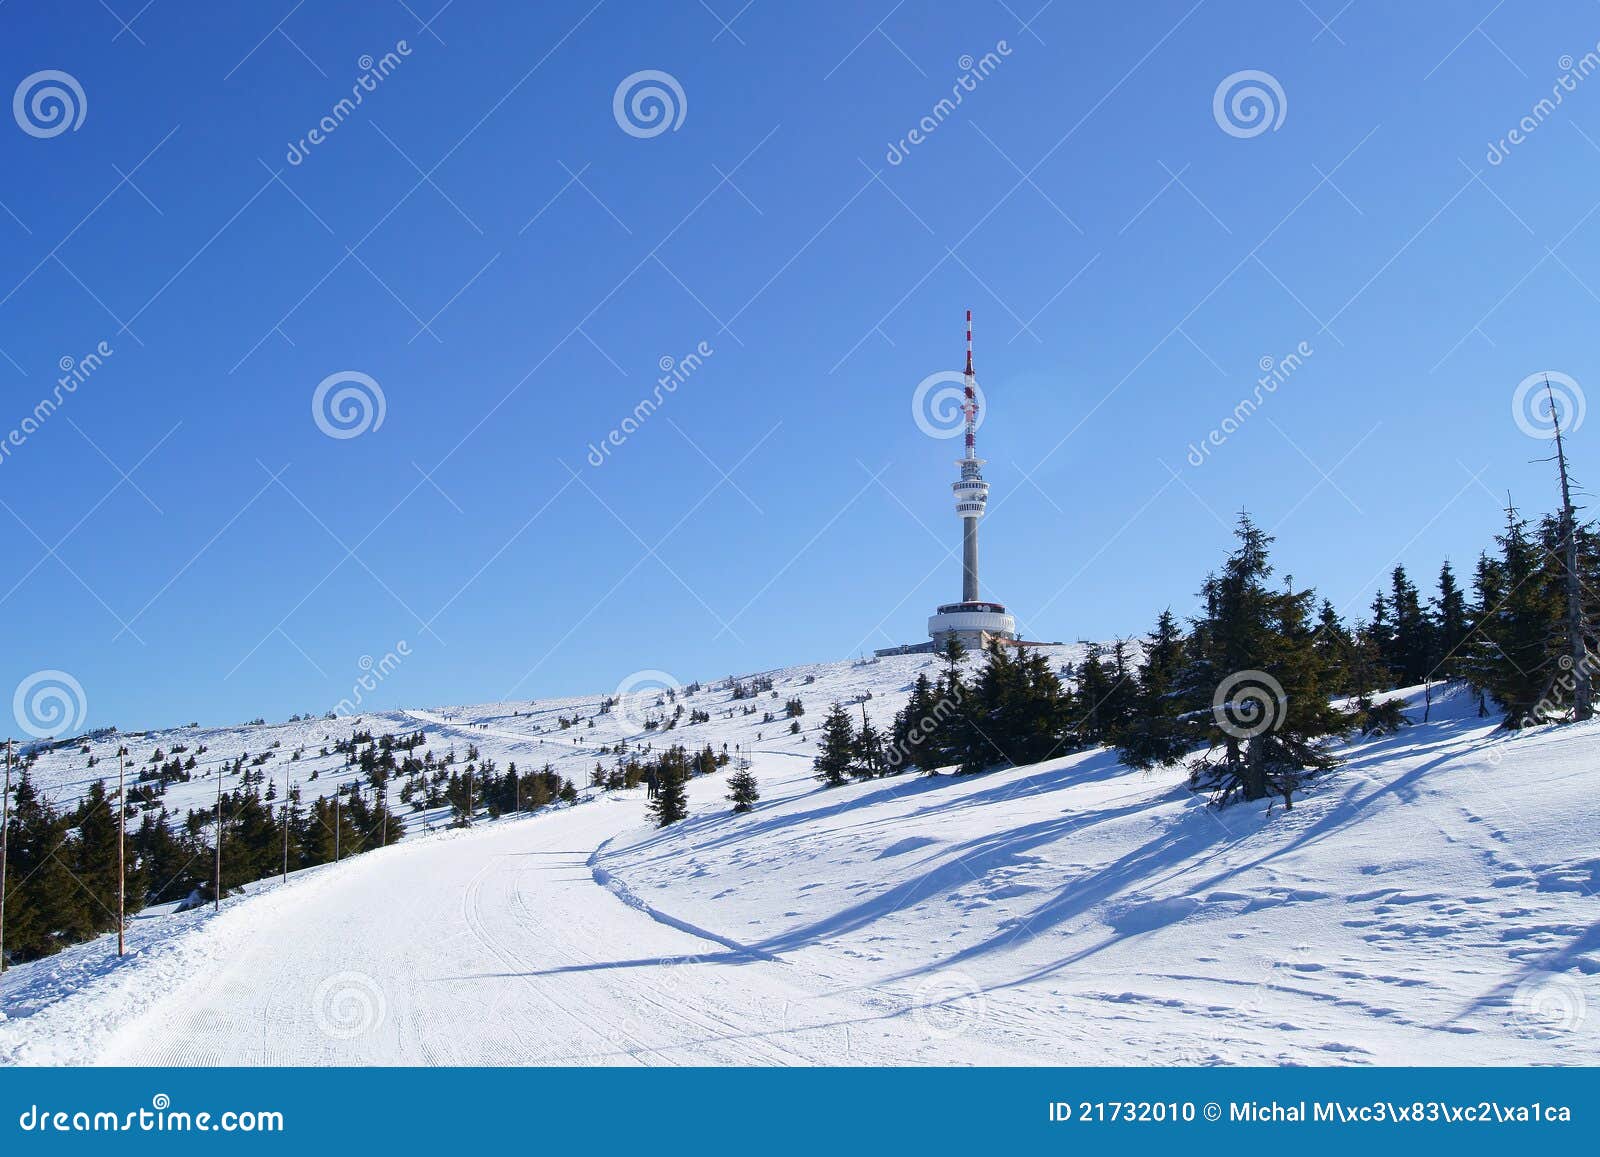 praded outlook tower at winter